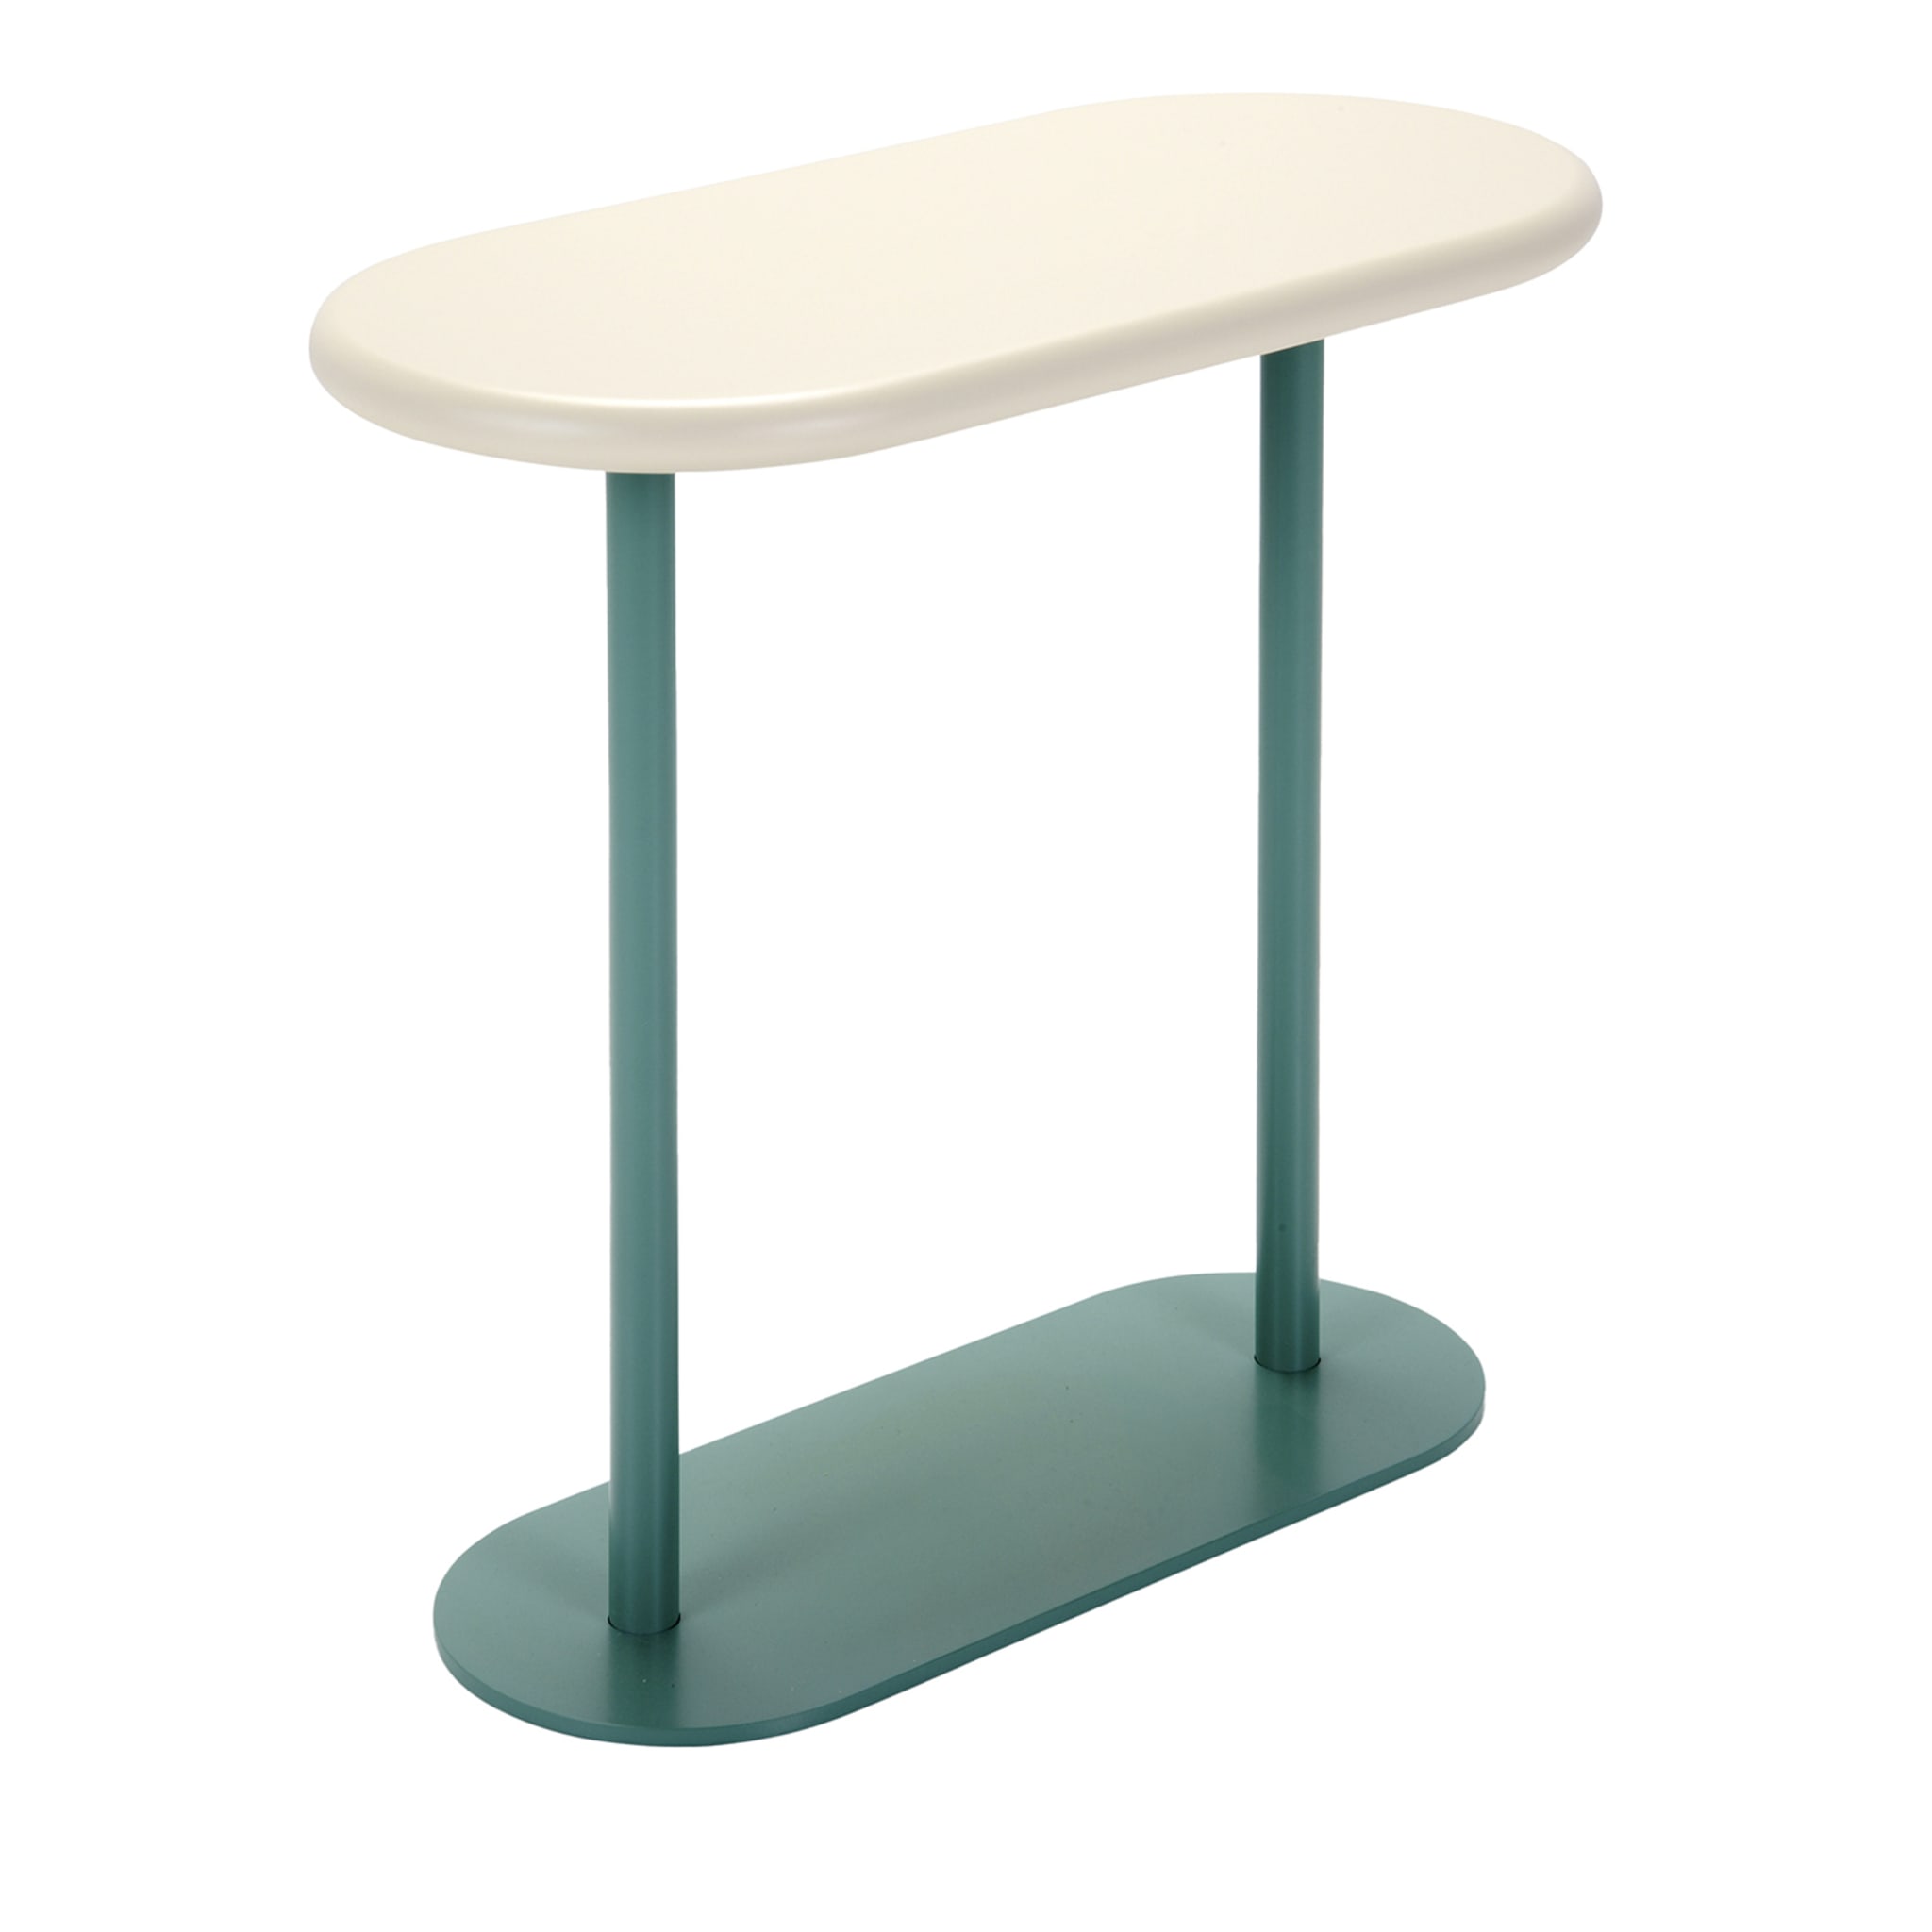 Green and White Biscuit Large Side Table by Kazuko Okamoto - Main view